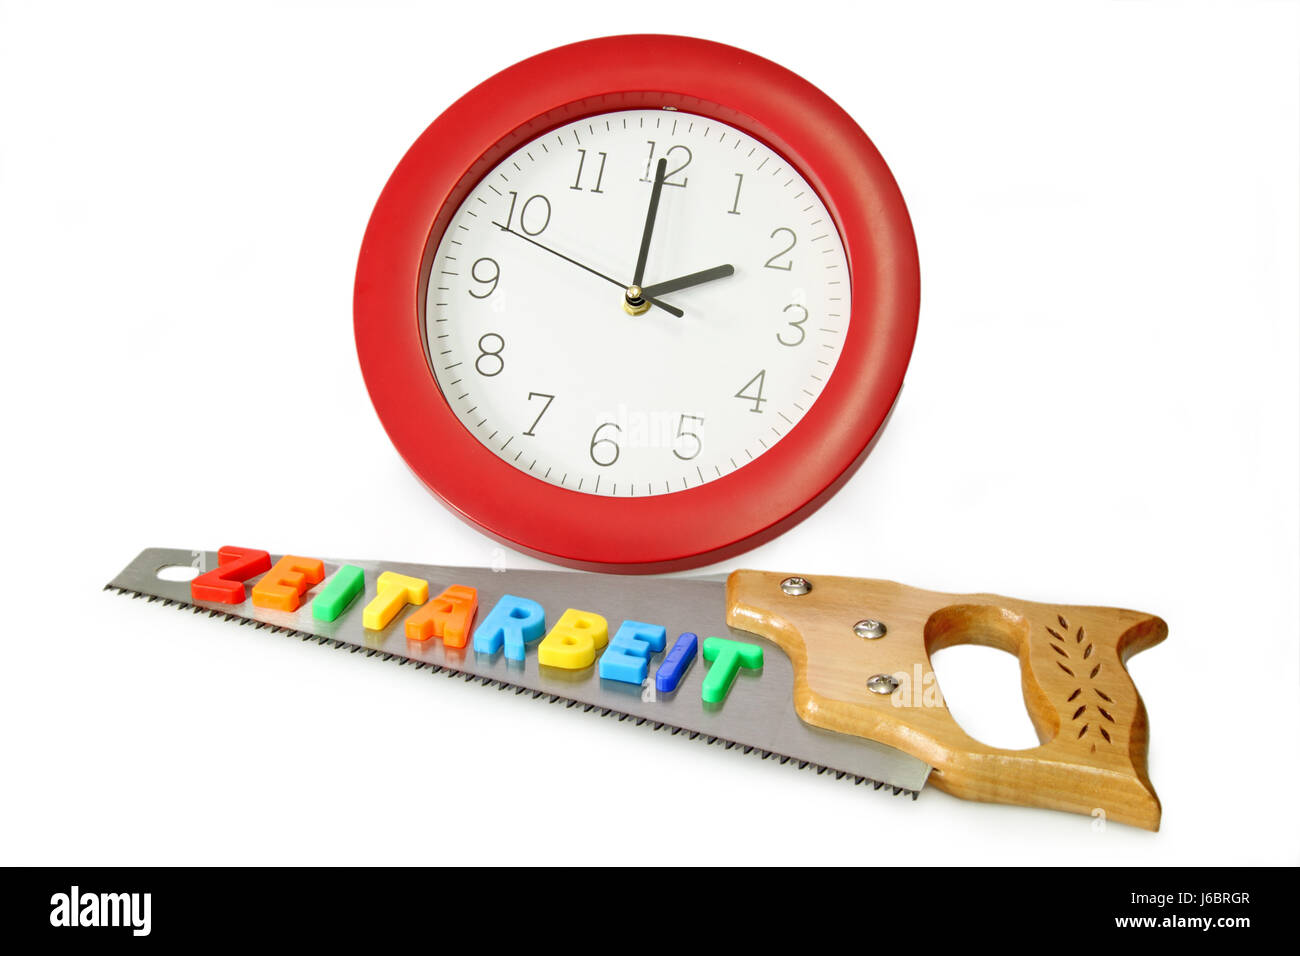 clock time time measurement myth saw handsaw time-work short time clock time Stock Photo